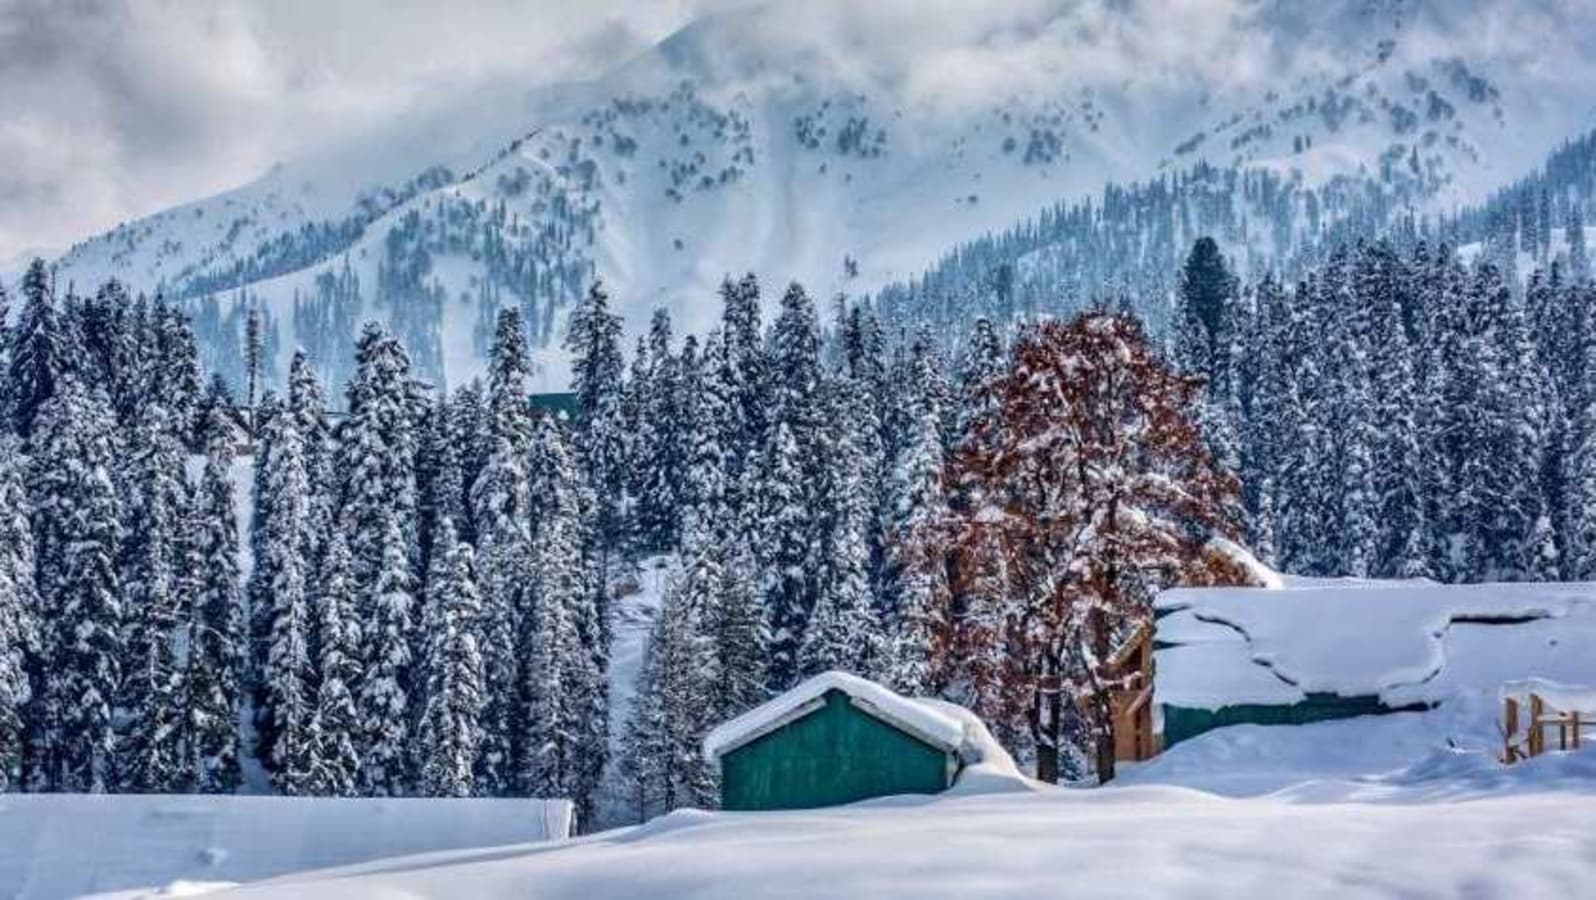 Snow covered Kashmir is truly winter wonderland, these serene pictures